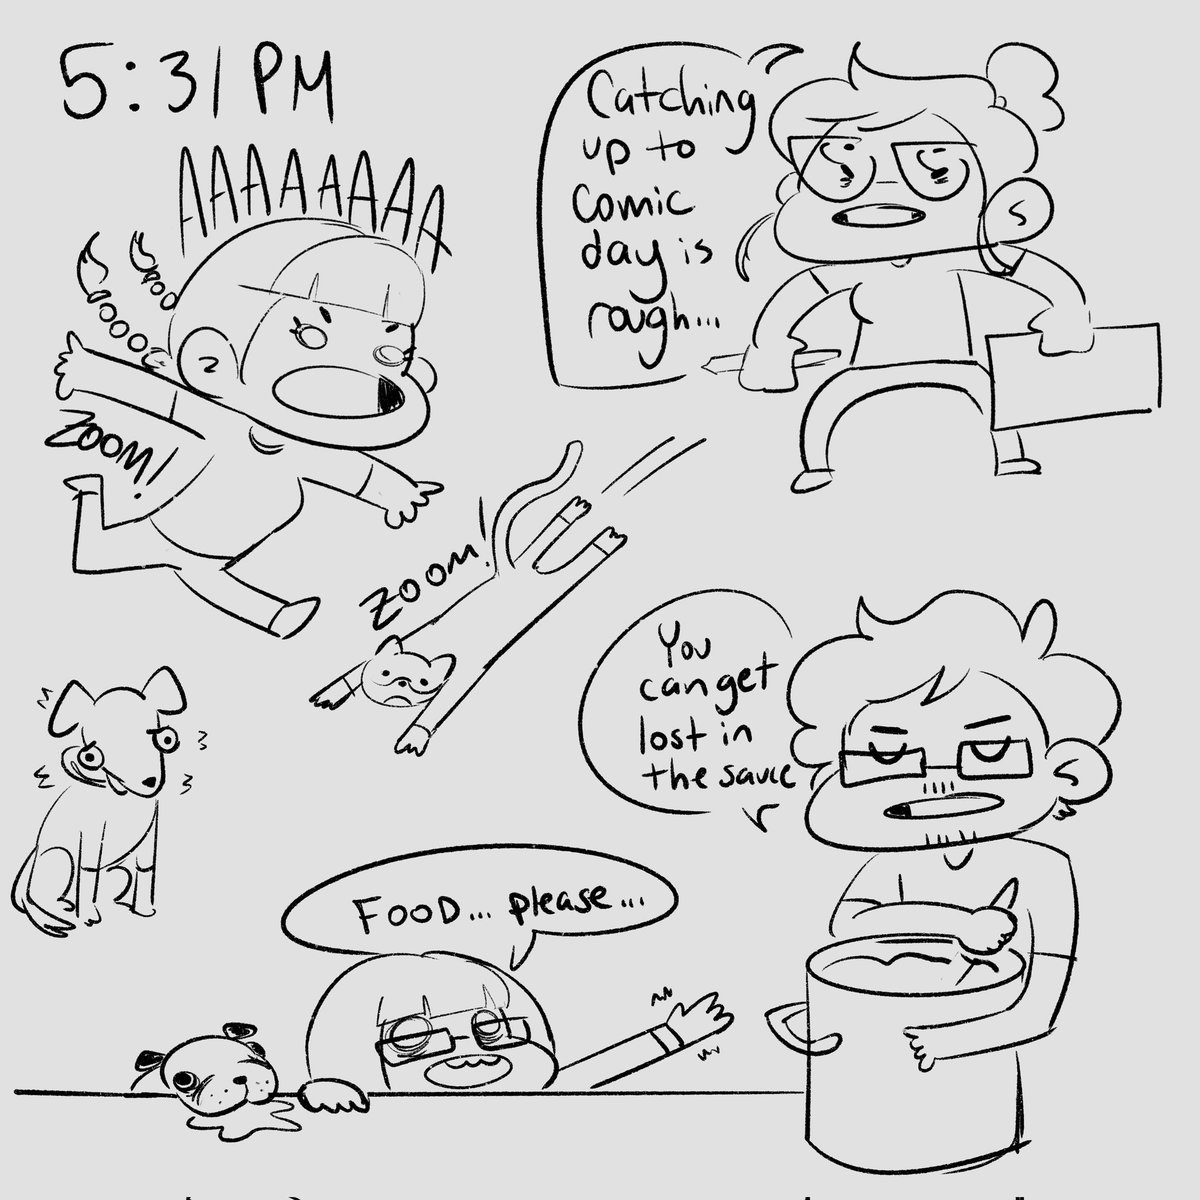 Dinner time #hourlycomicday2022 